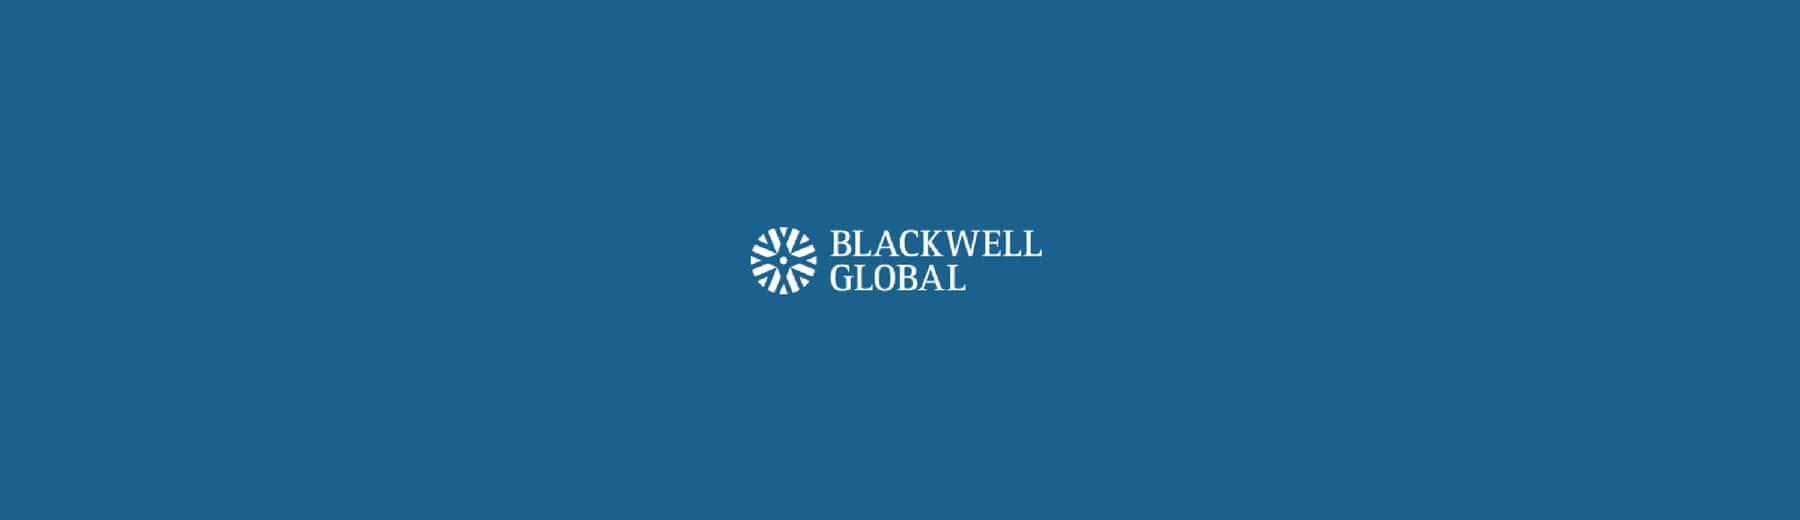 Blackwell Global Upgrades FCA Licence to Become Full-Scope IFPRU €730k Firm